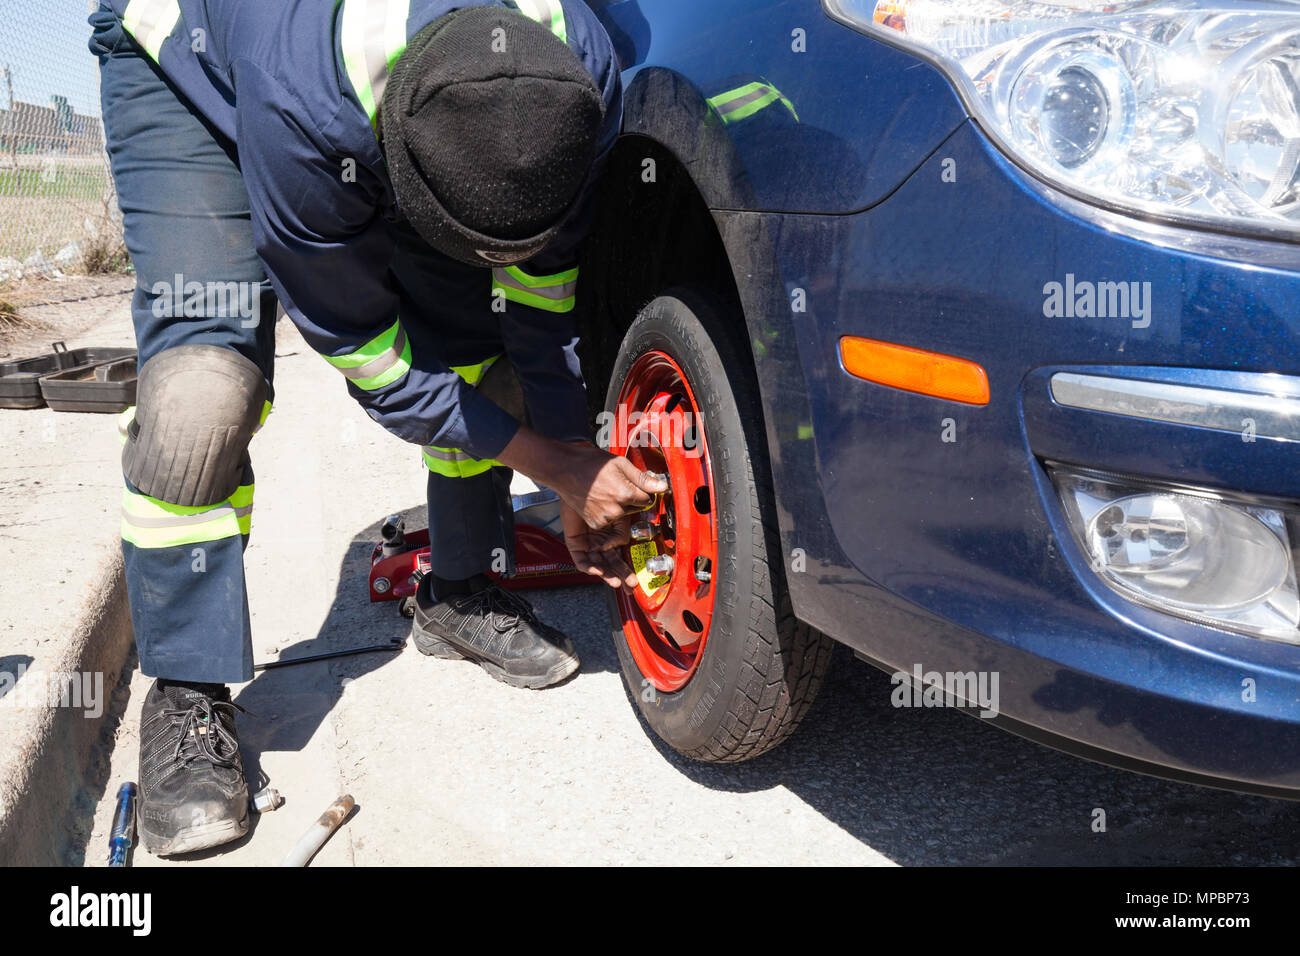 A service technician or person installing a spare tire or tyre. Stock Photo